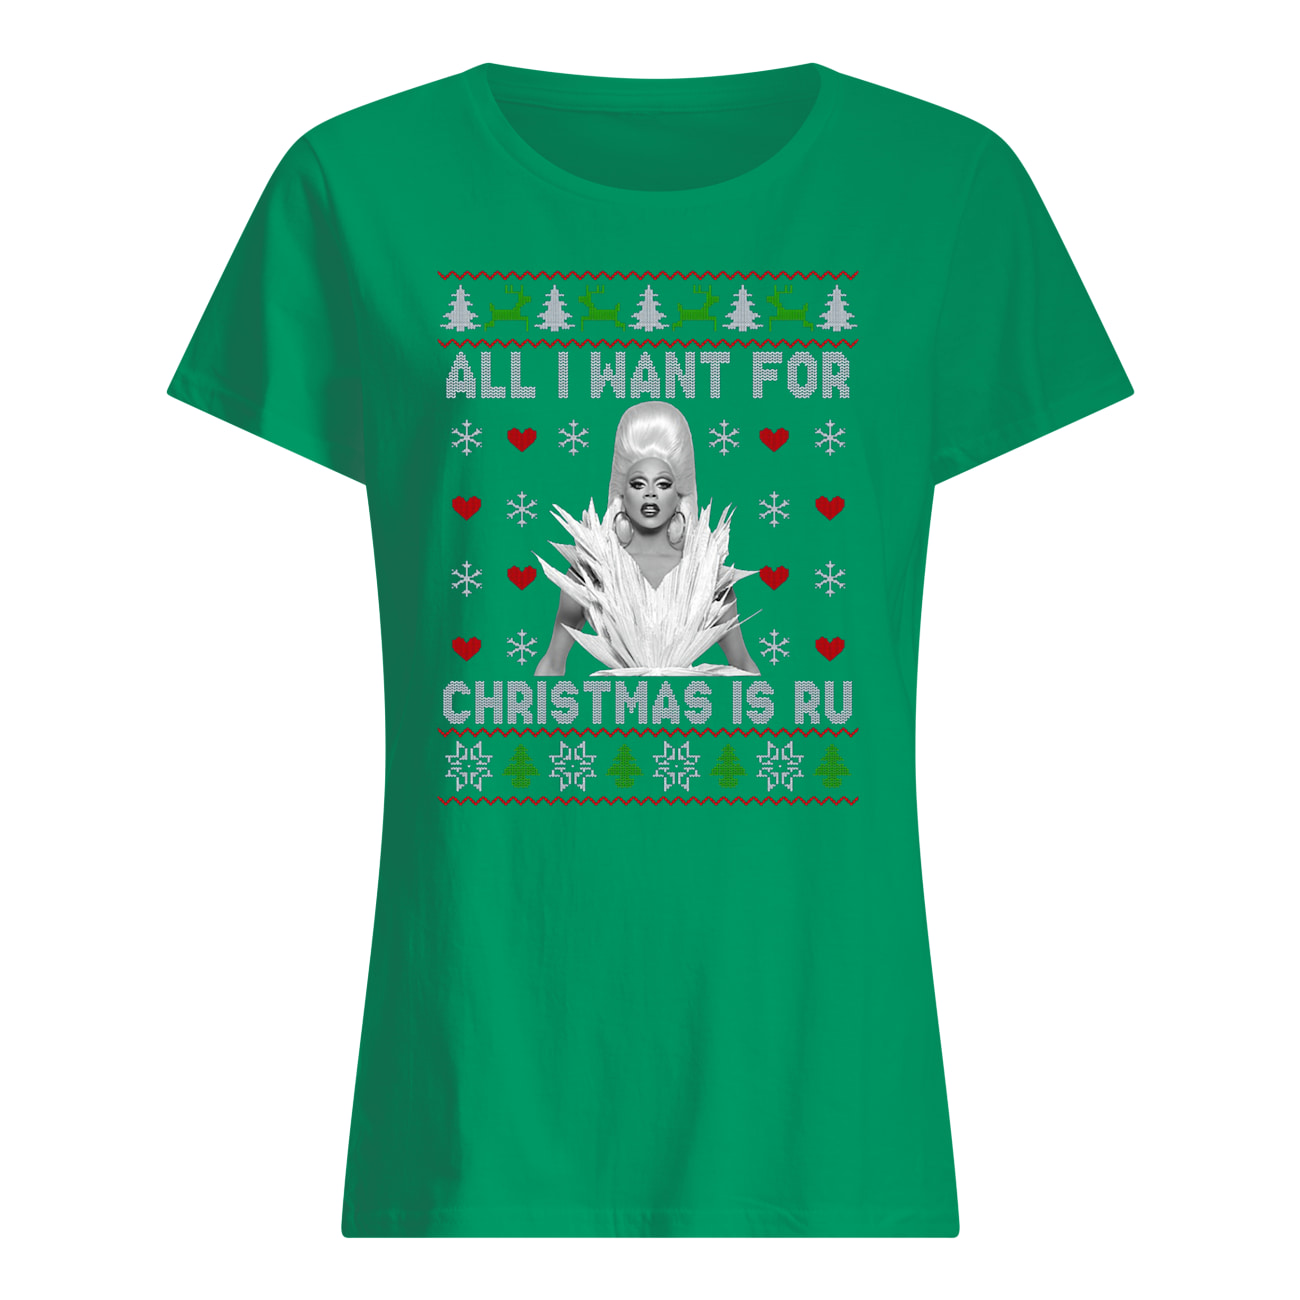 Rupaul's drag race all i want for christmas is ru womens shirt